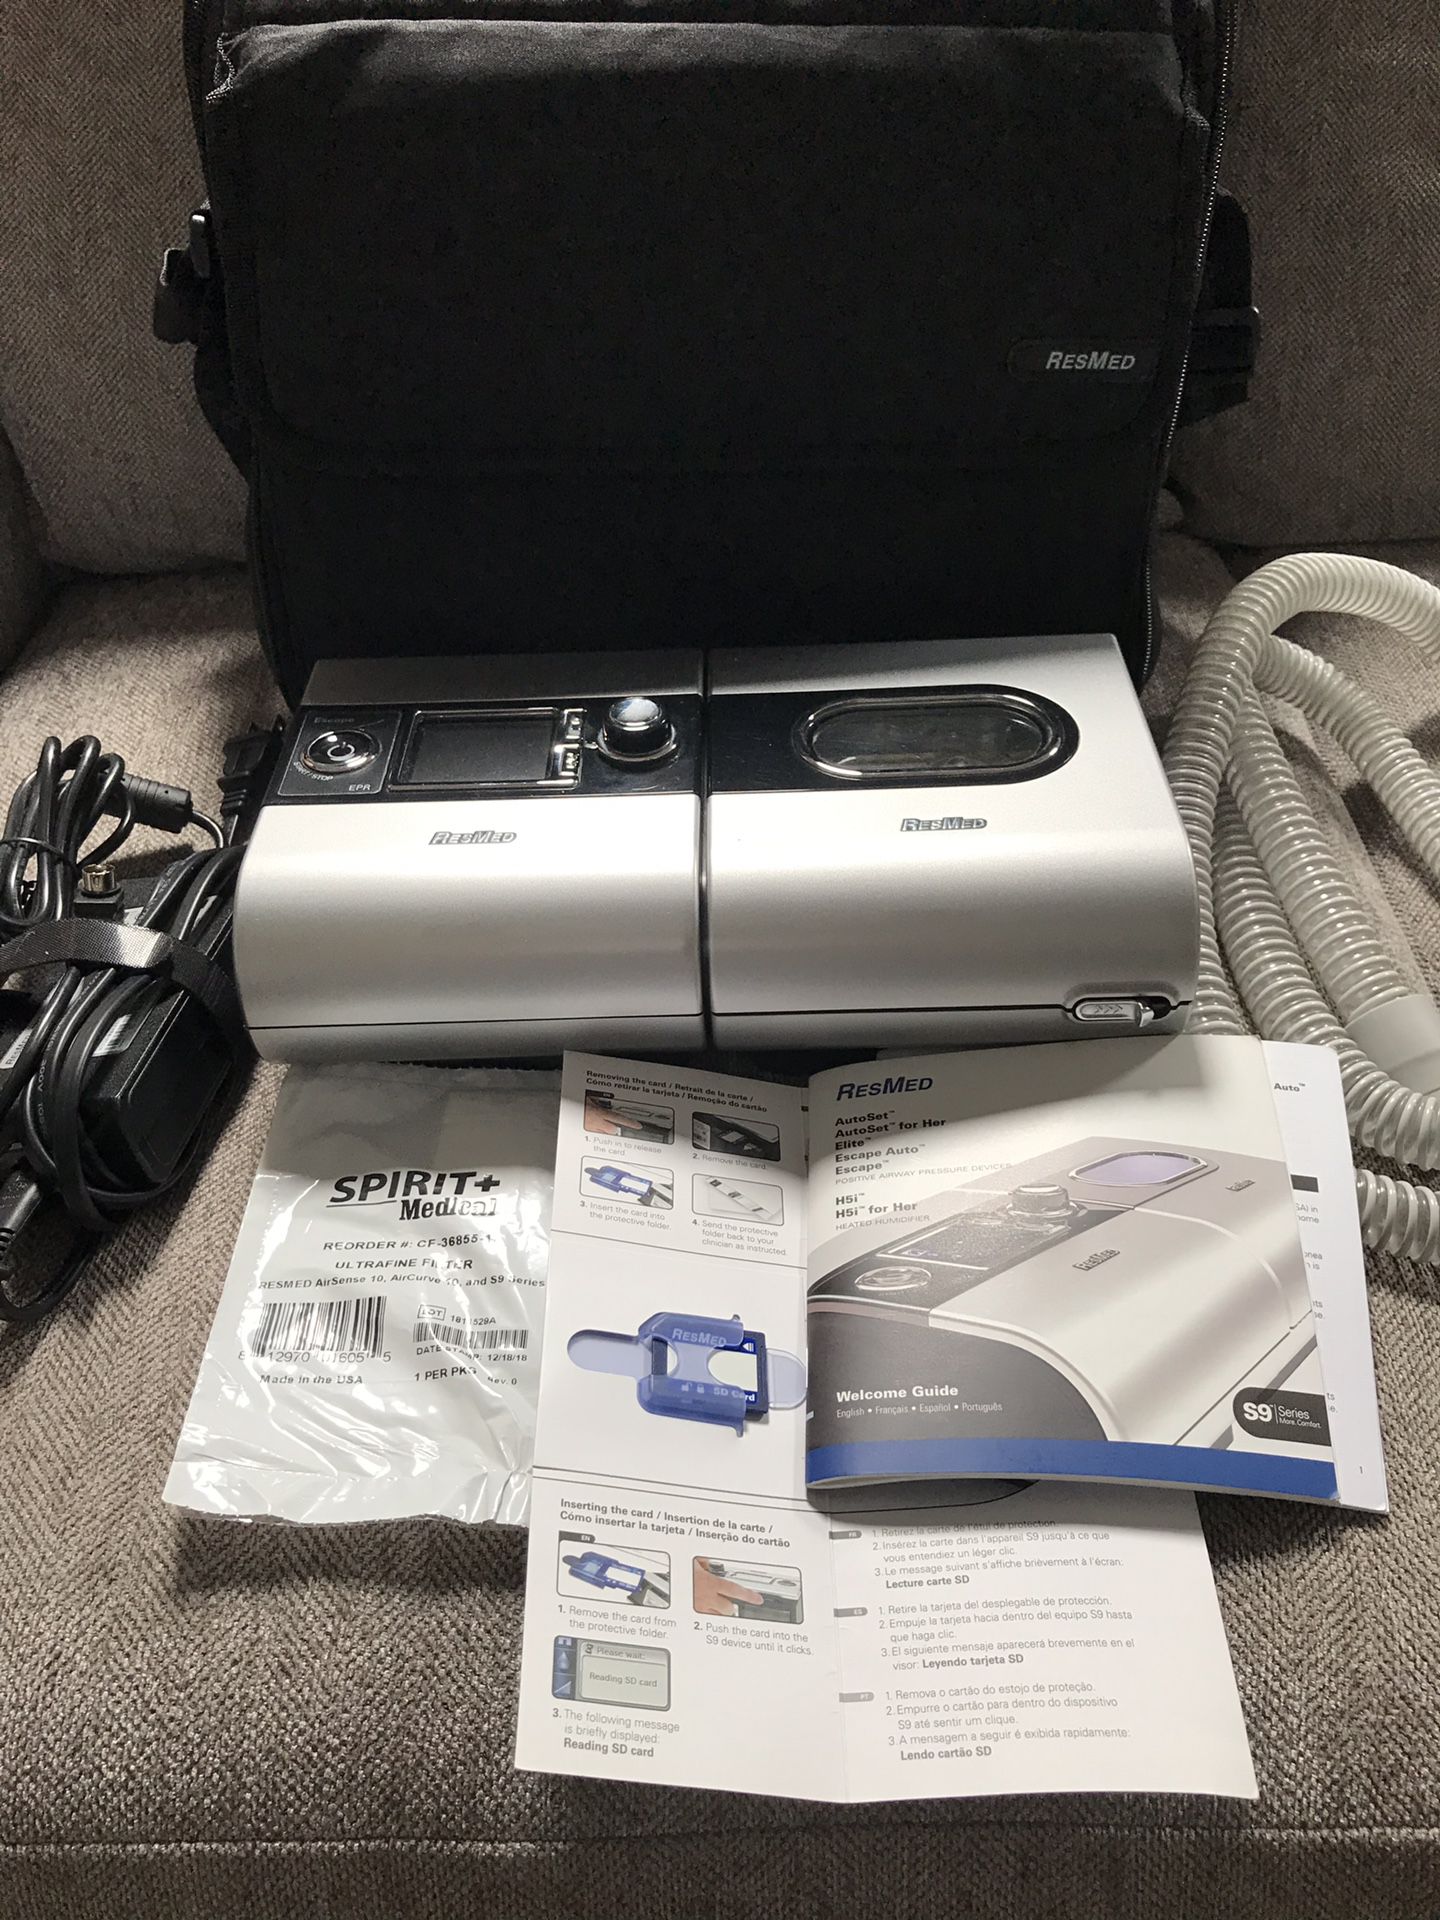 Very Nice Resmed s9 H5i Escape EPR Cpap Machine Great Machine & Great Deal Excepting Offers